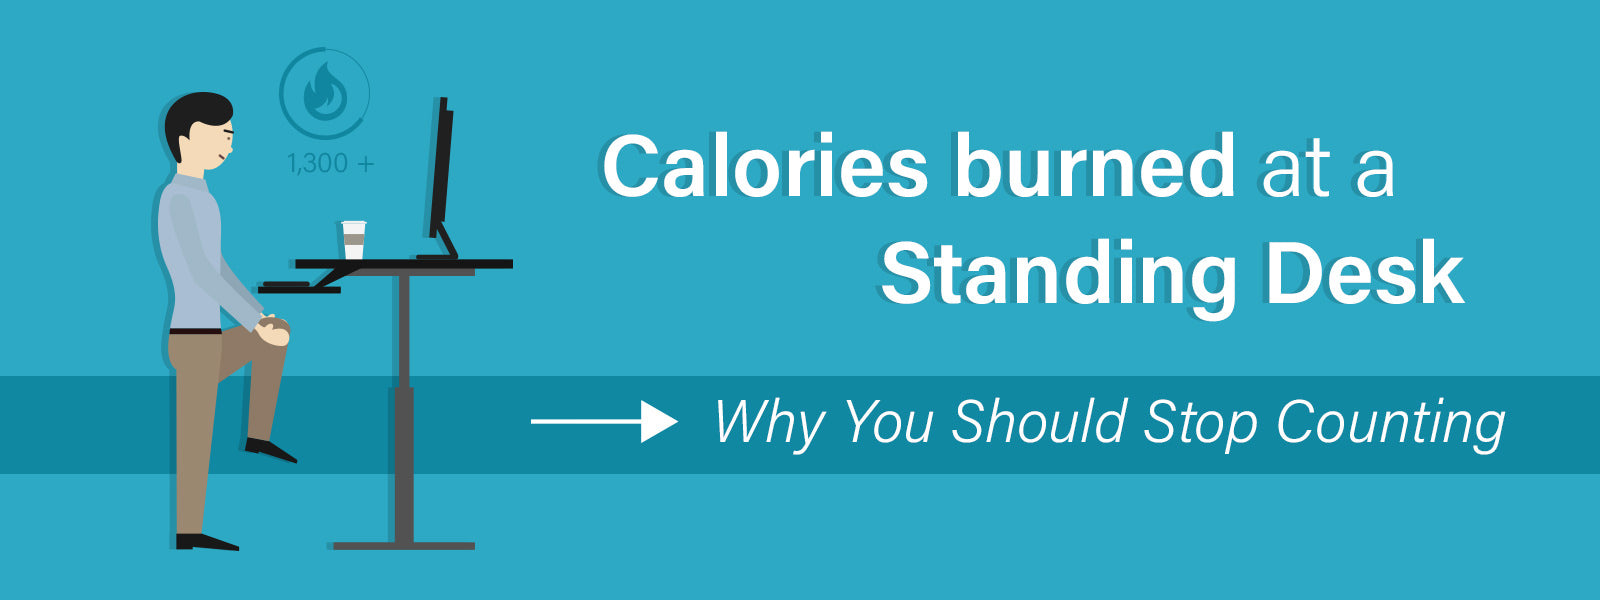 Calories Burned At A Standing Desk Why You Should Stop Counting